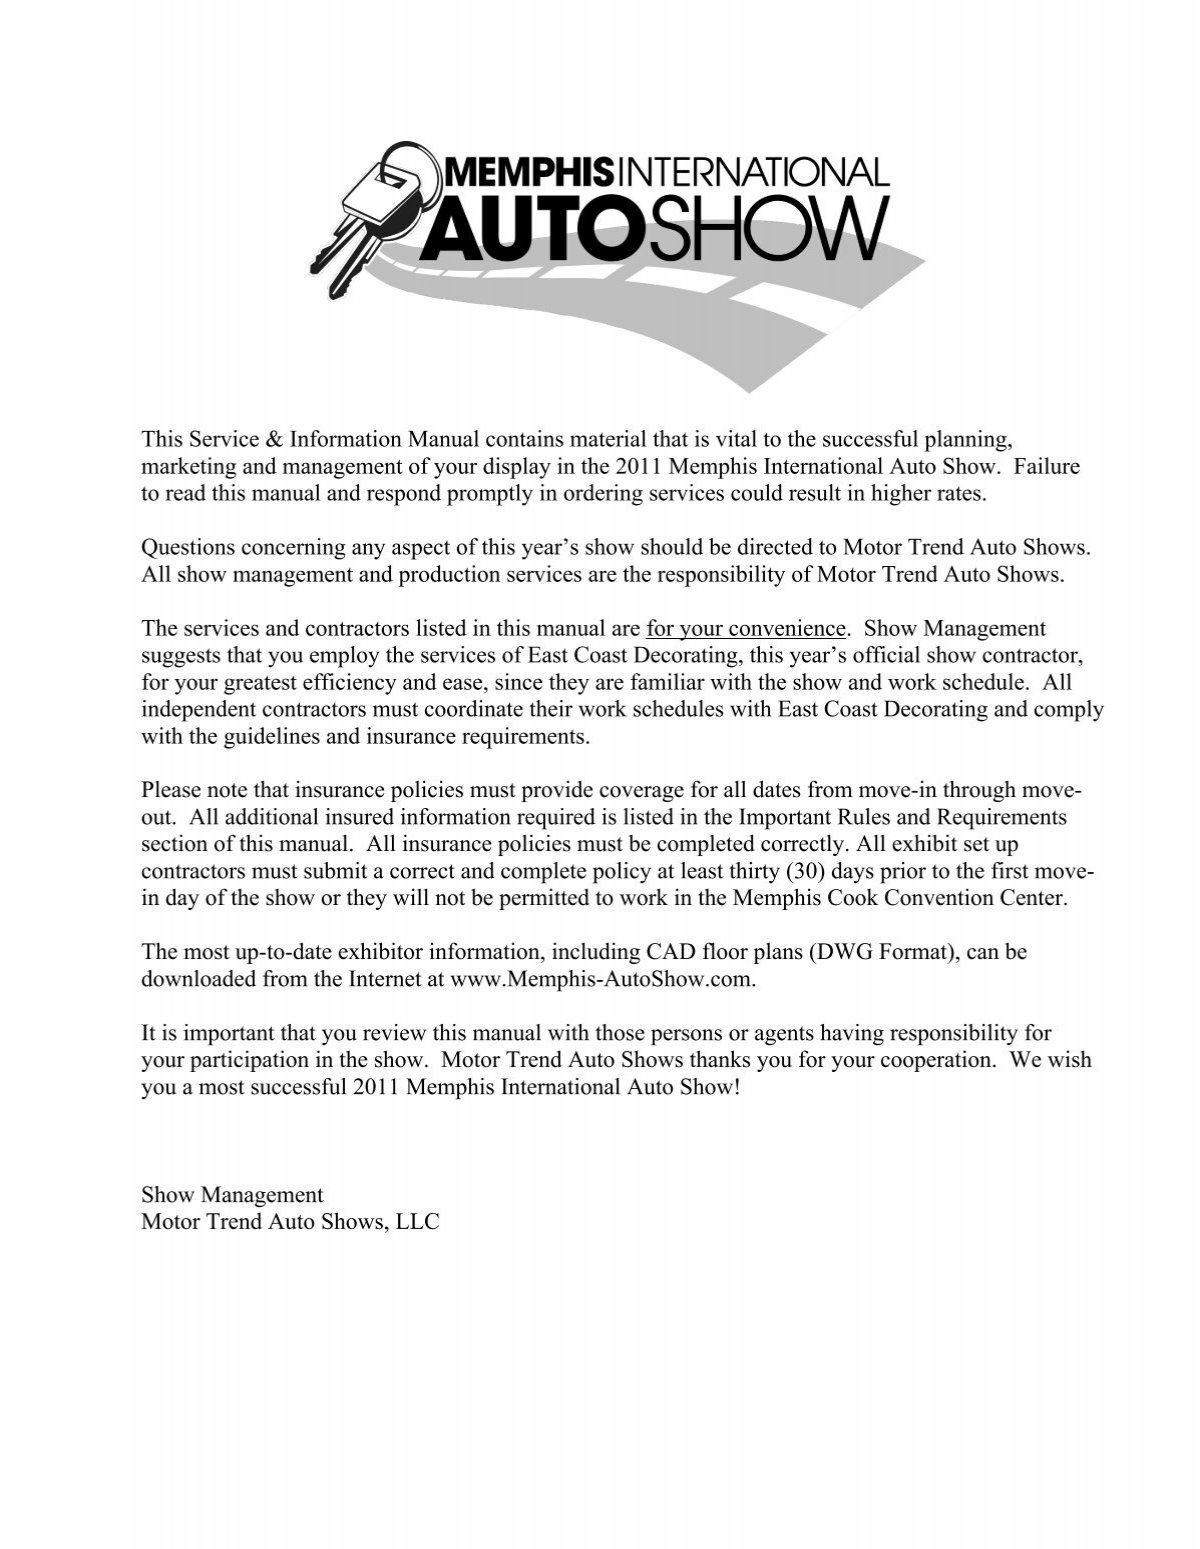 Memphis International Auto Show in full effect this weekend